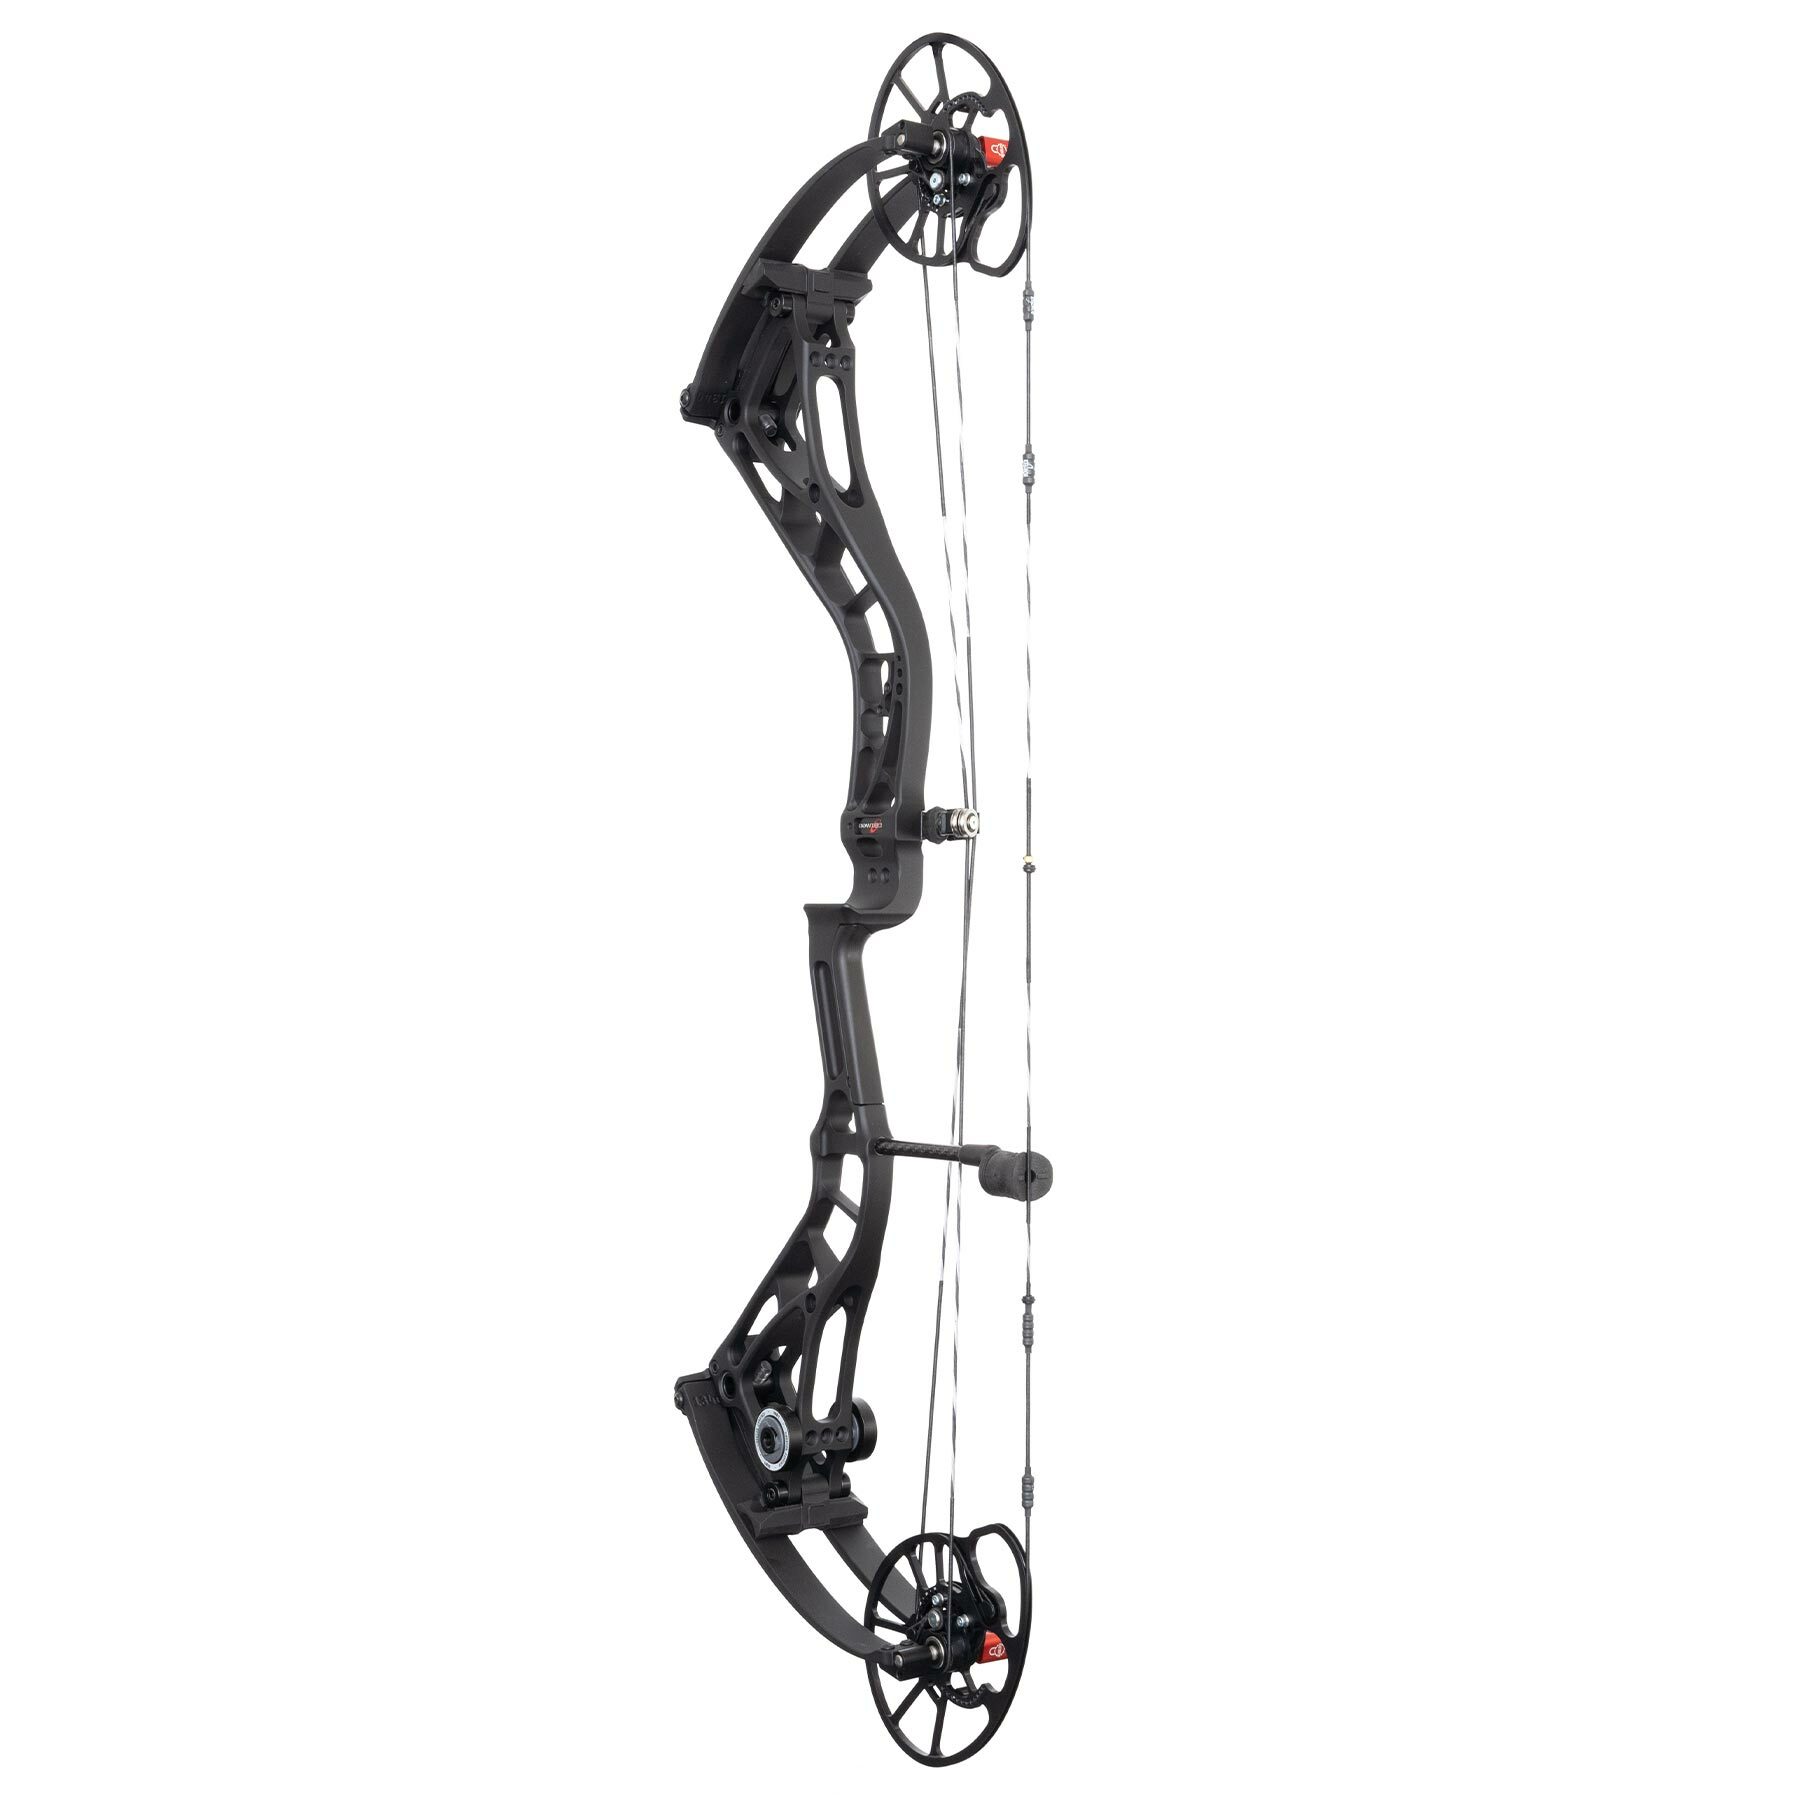 Bowtech DS TYPE CAM MODULES One of your Choice Sizes 1-6 in the Drop Down Menu 